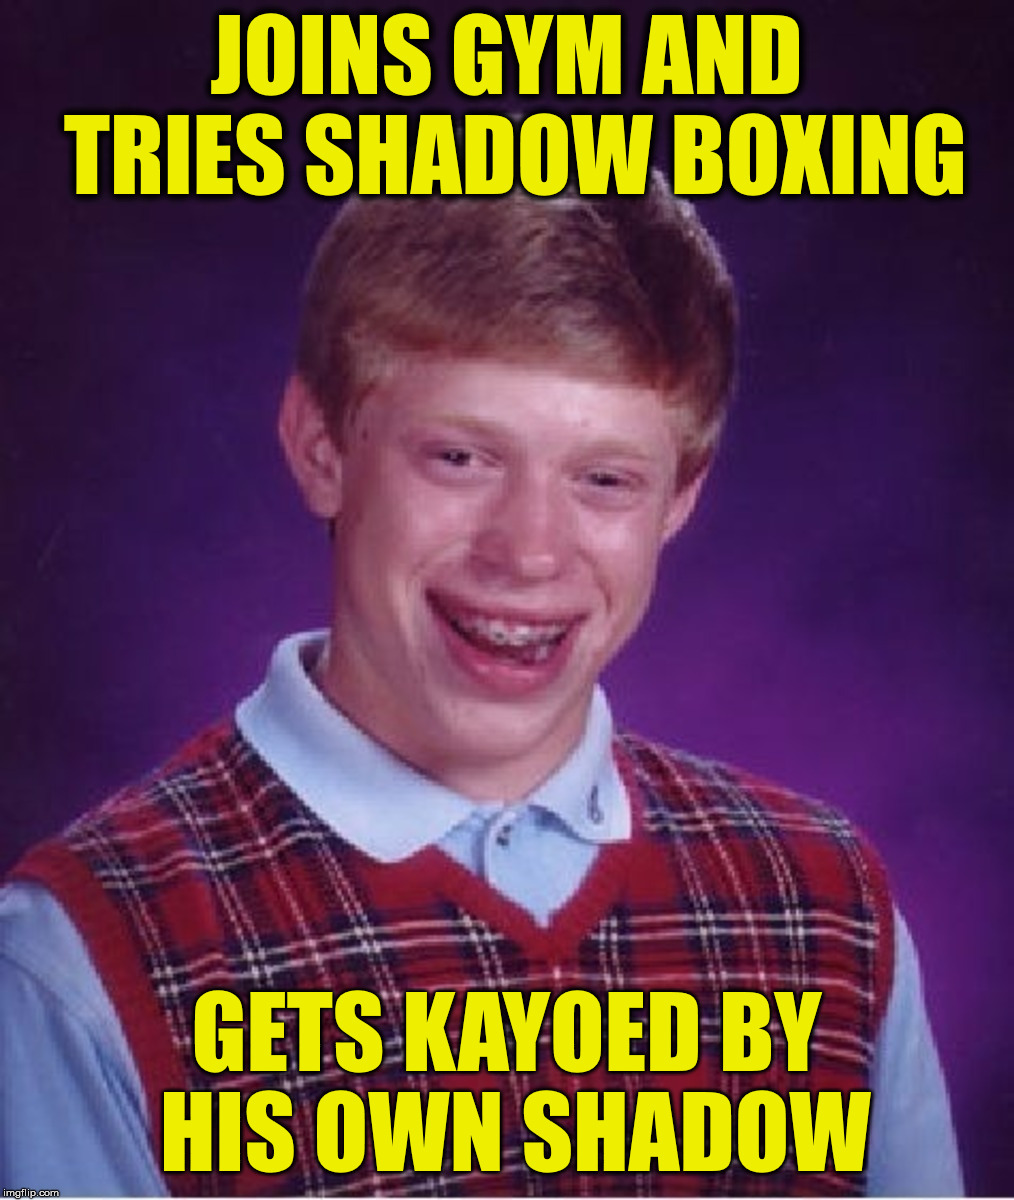 Lost round in first 14 seconds | JOINS GYM AND TRIES SHADOW BOXING; GETS KAYOED BY HIS OWN SHADOW | image tagged in bad luck brian,shadow boxing,sports | made w/ Imgflip meme maker